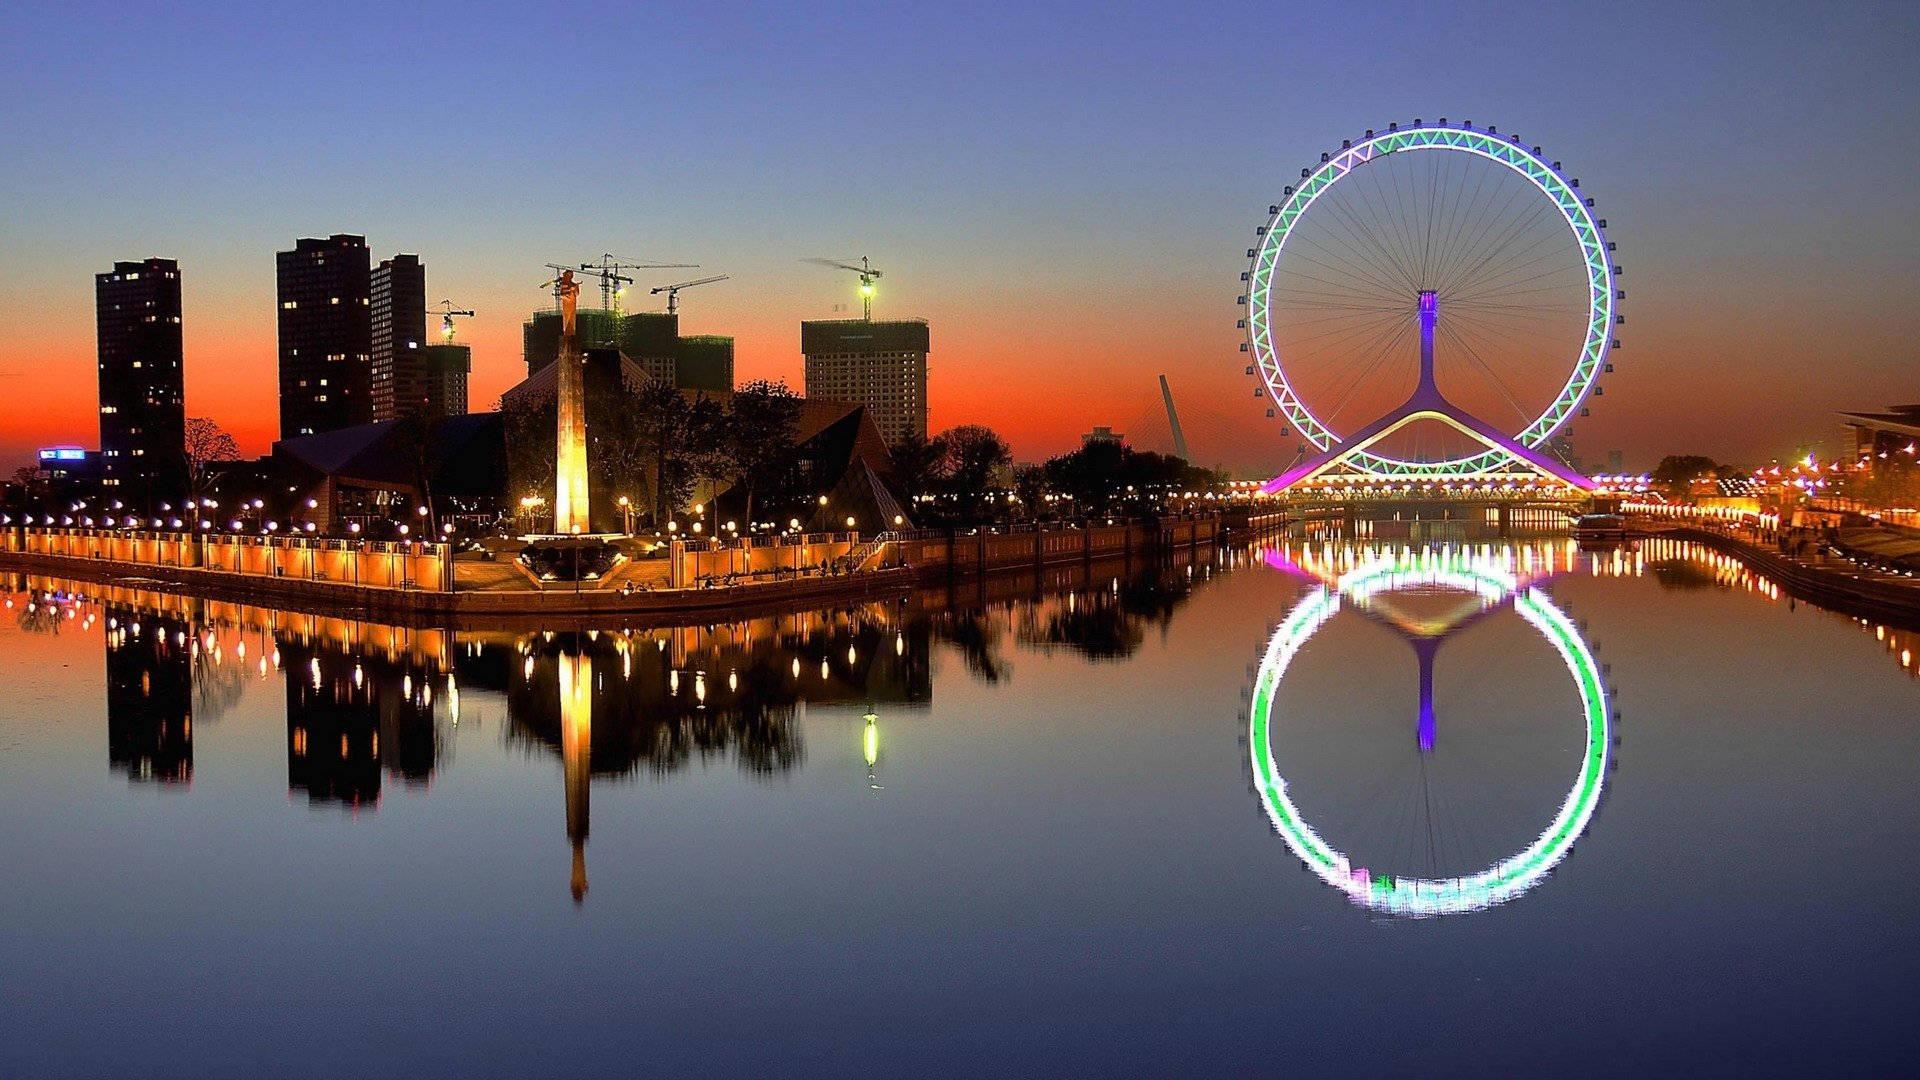 The Tianjin Eye At Sunset